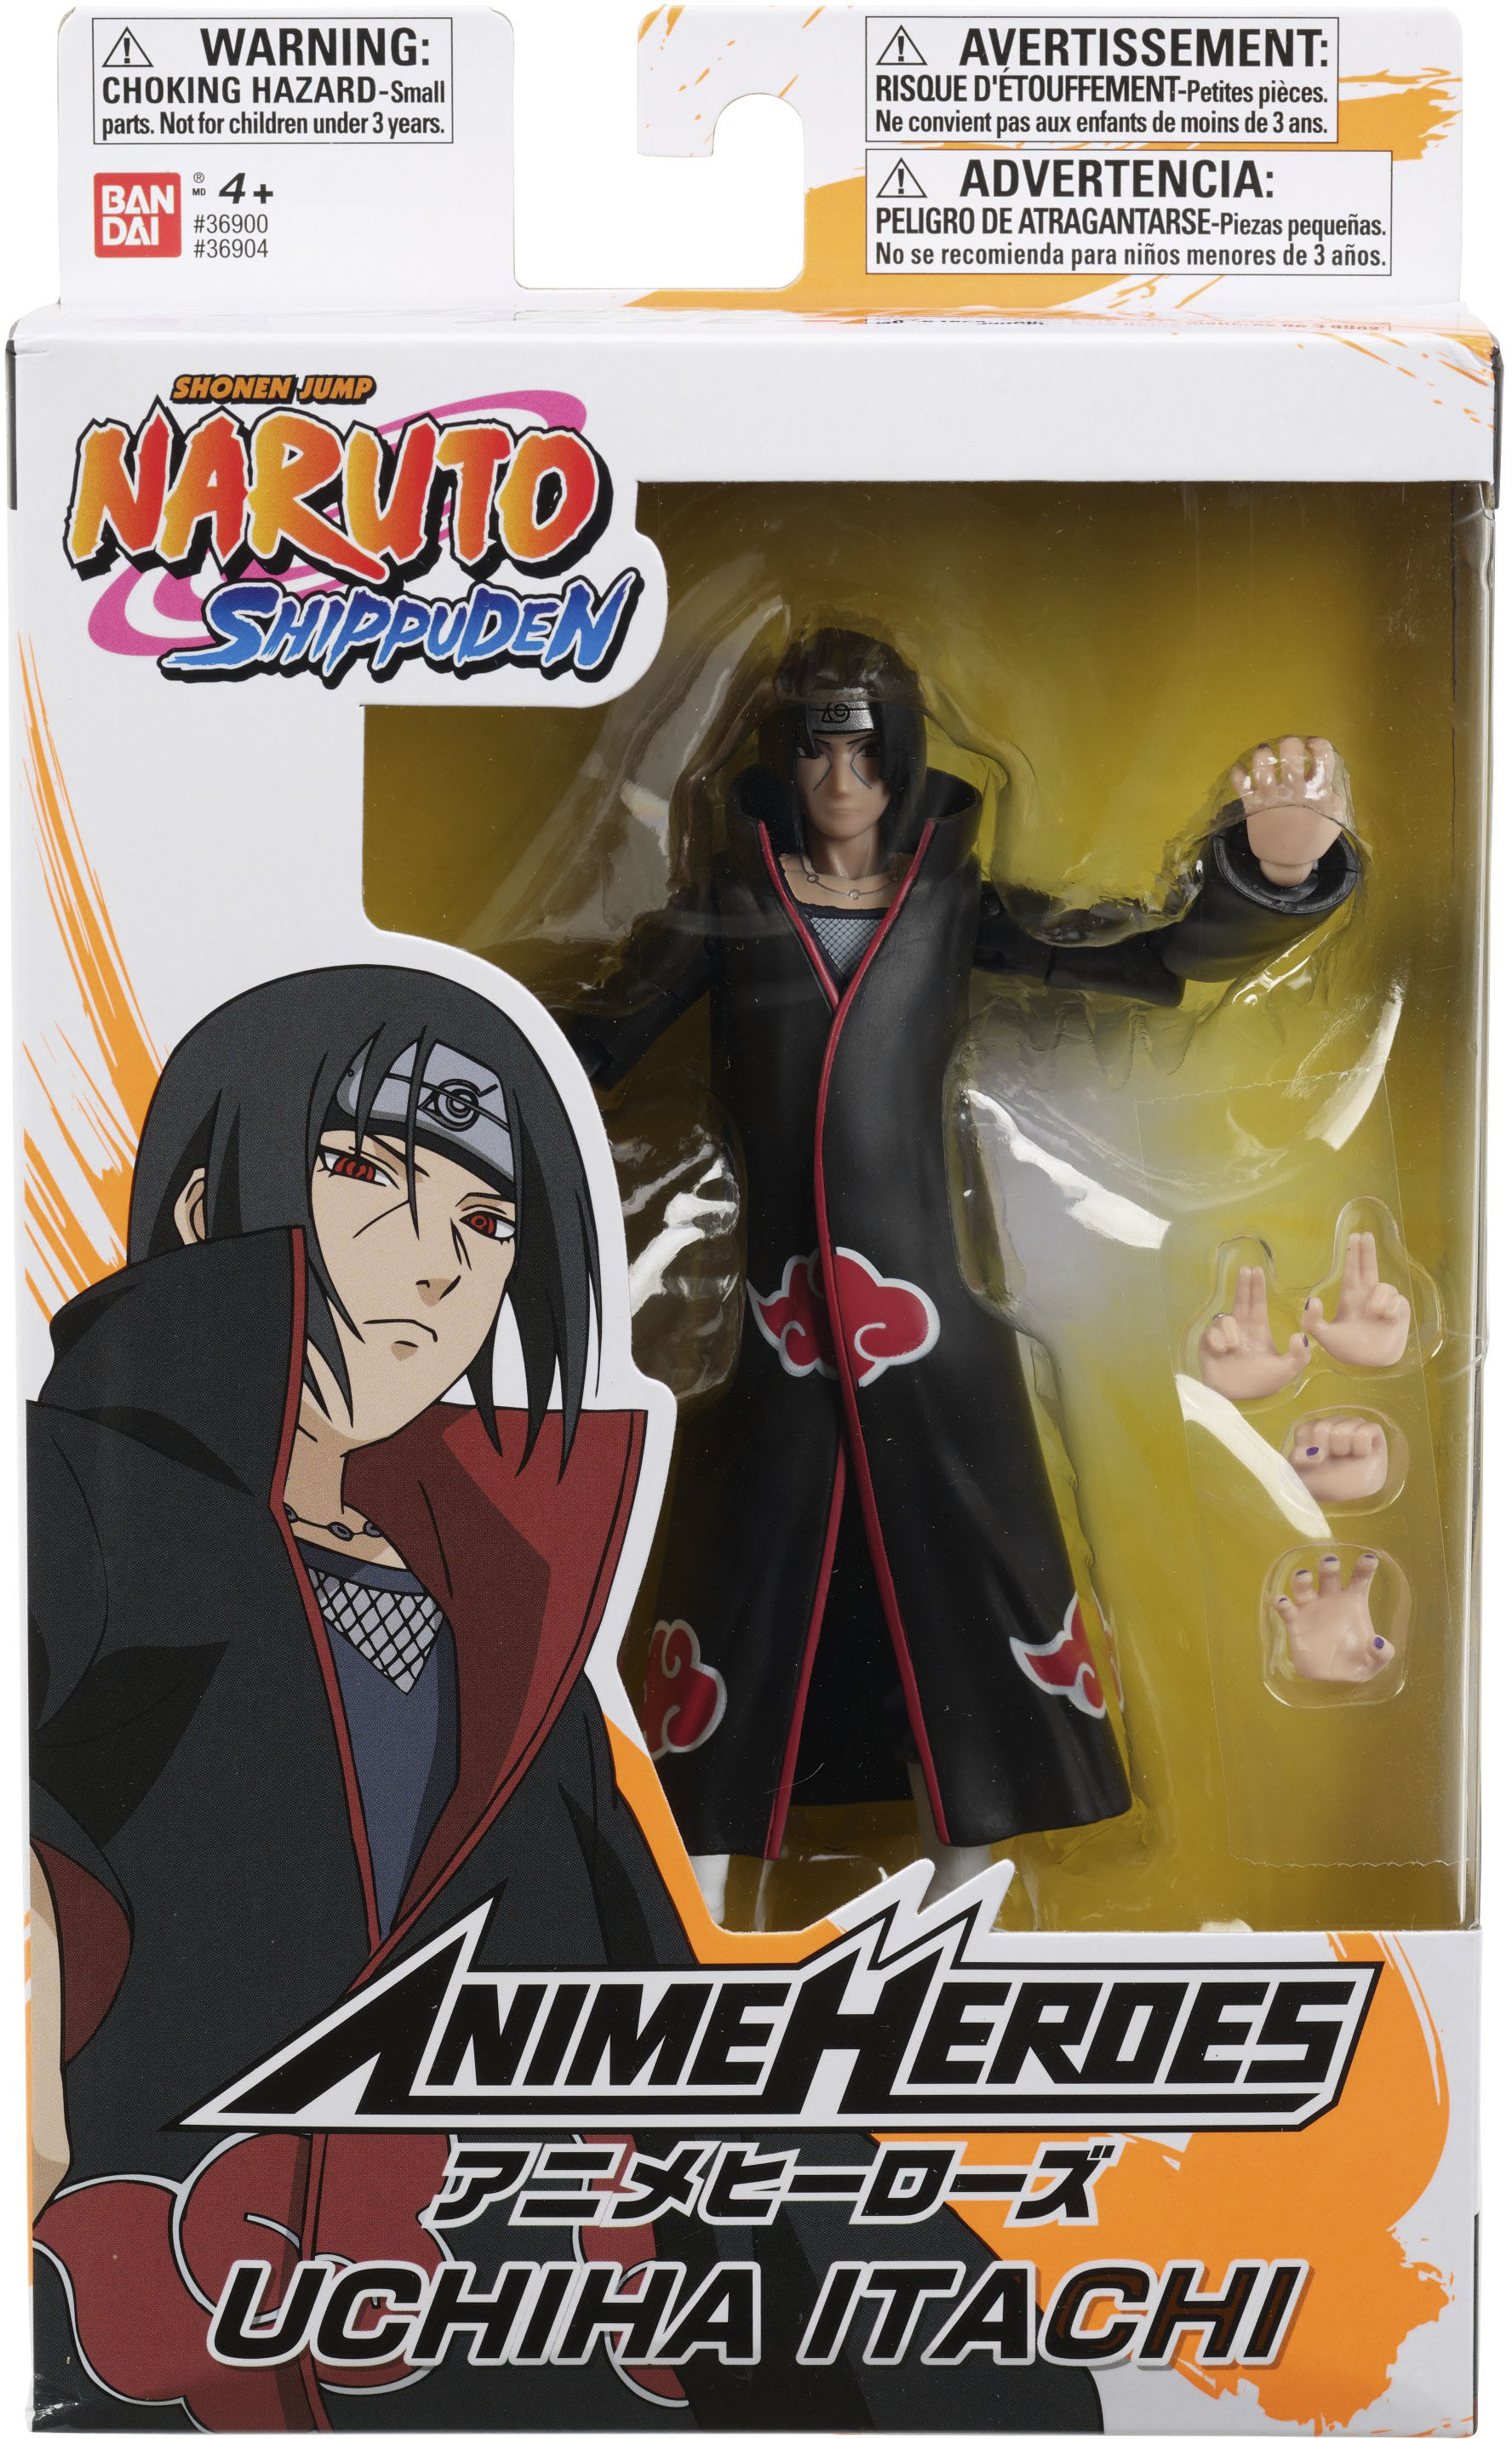 Bandai Anime Heroes Naruto 6.5 Action Figure Asst Styles May Vary 36900 -  Best Buy